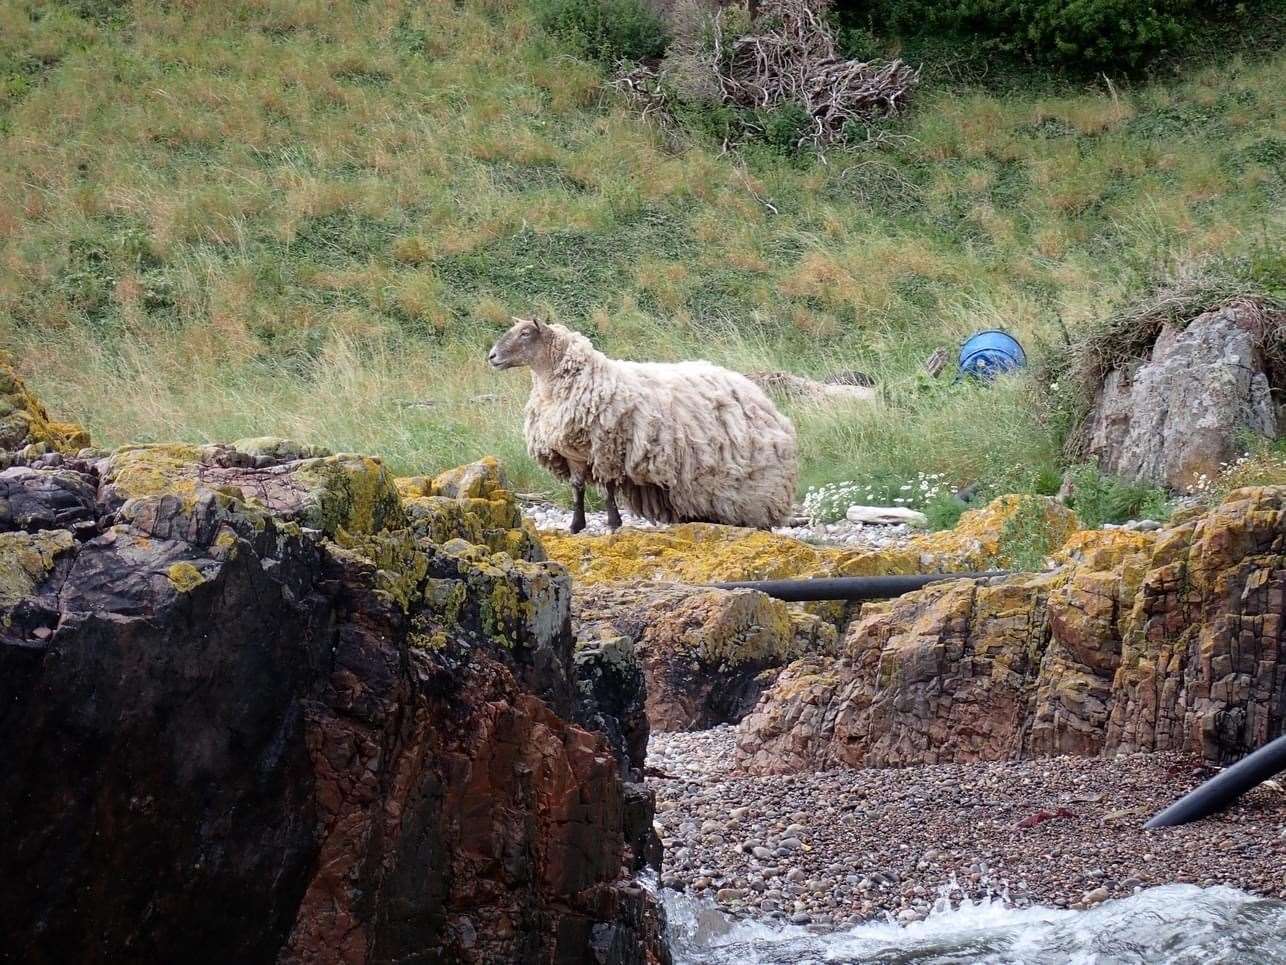 The sheep has been so long at the bottom of the cliff that her fleece is now huge and touching the ground at the back.